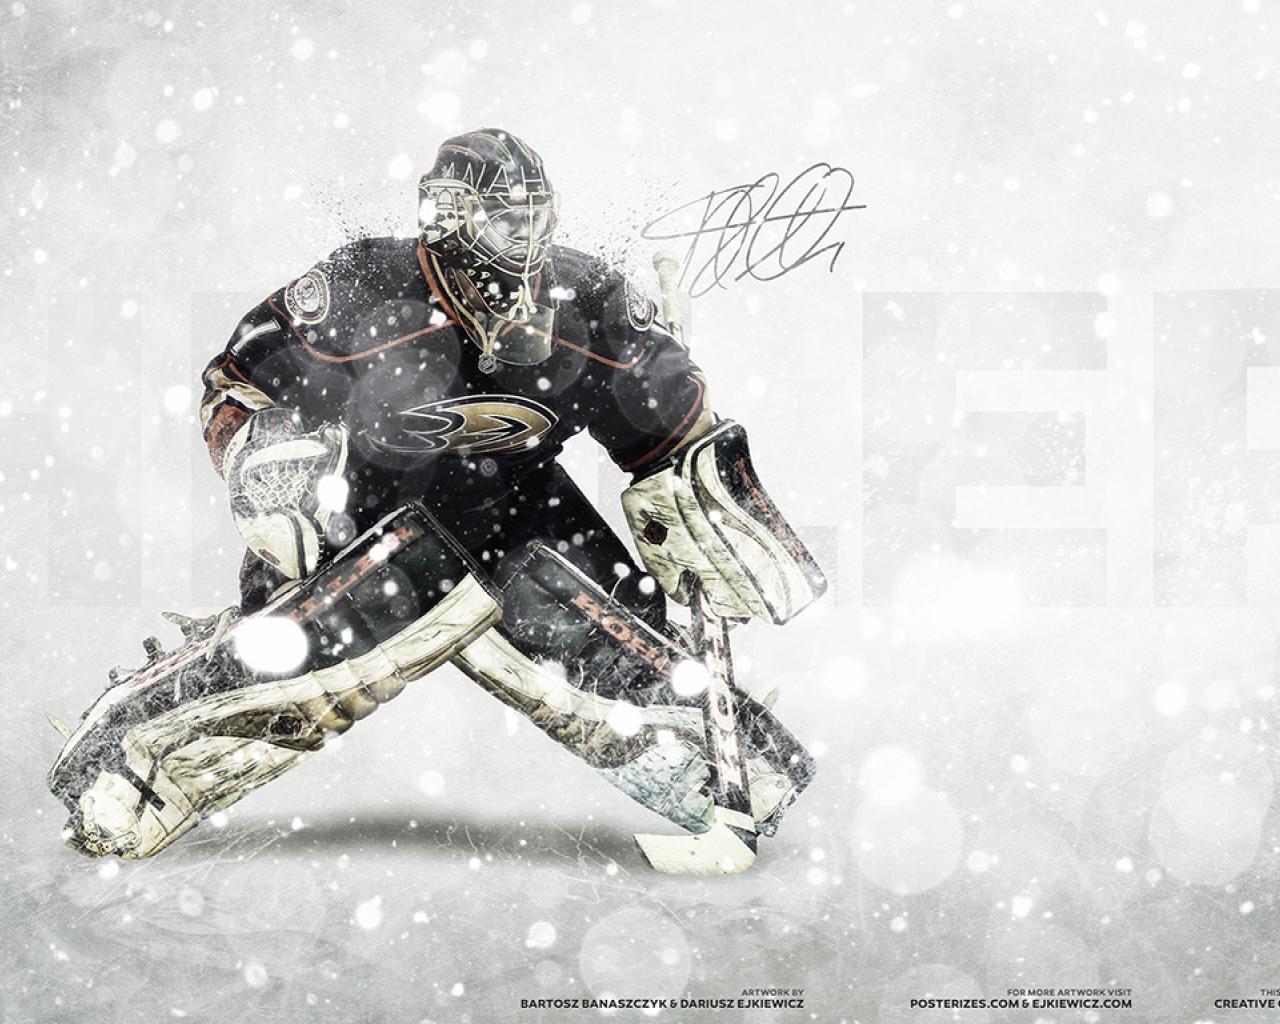 Ice Hockey Stunning Wallpapers  Pro Sports Backgrounds in HD